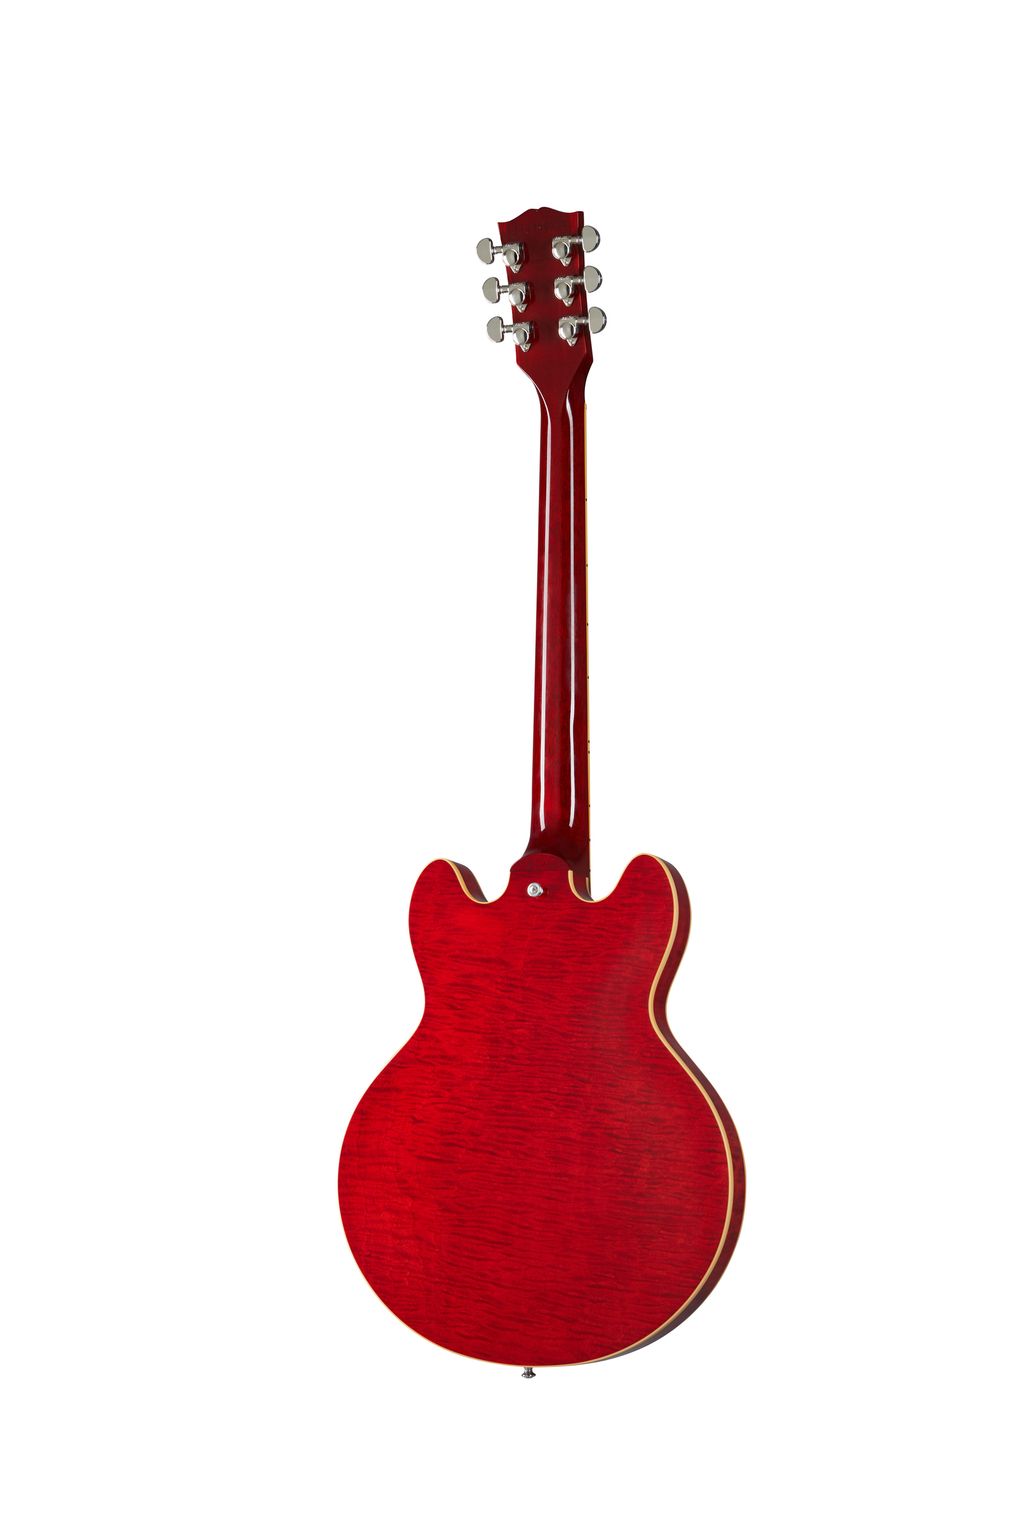 __static.gibson.com_product-images_USA_USARIR238_Sixties_Cherry_ES39F00SCNH1_back